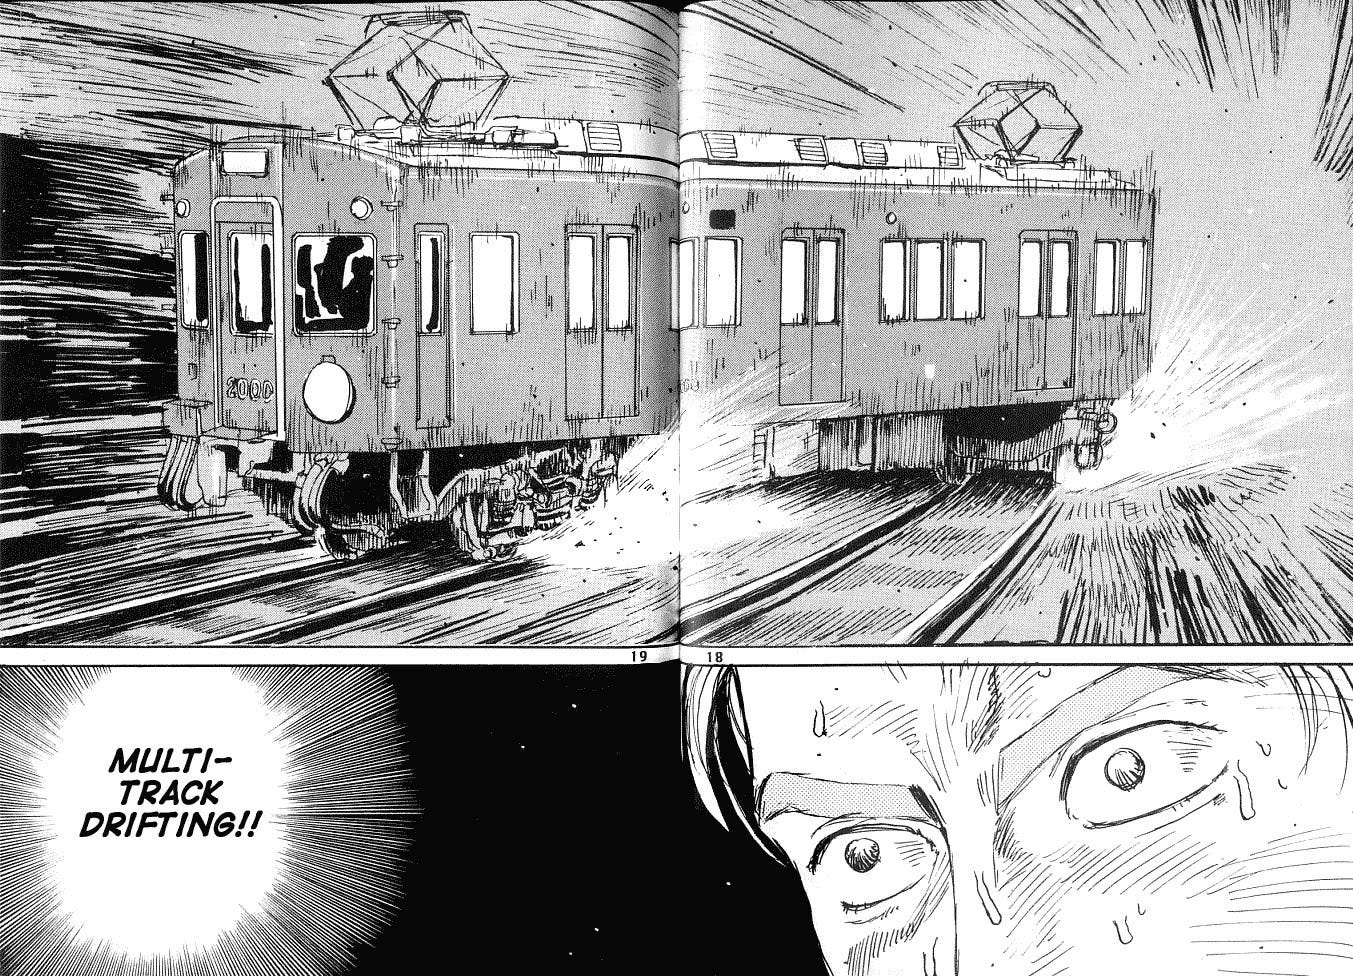 Trolley Problem Memes Present New Dilemma With Multi-Track Drifting